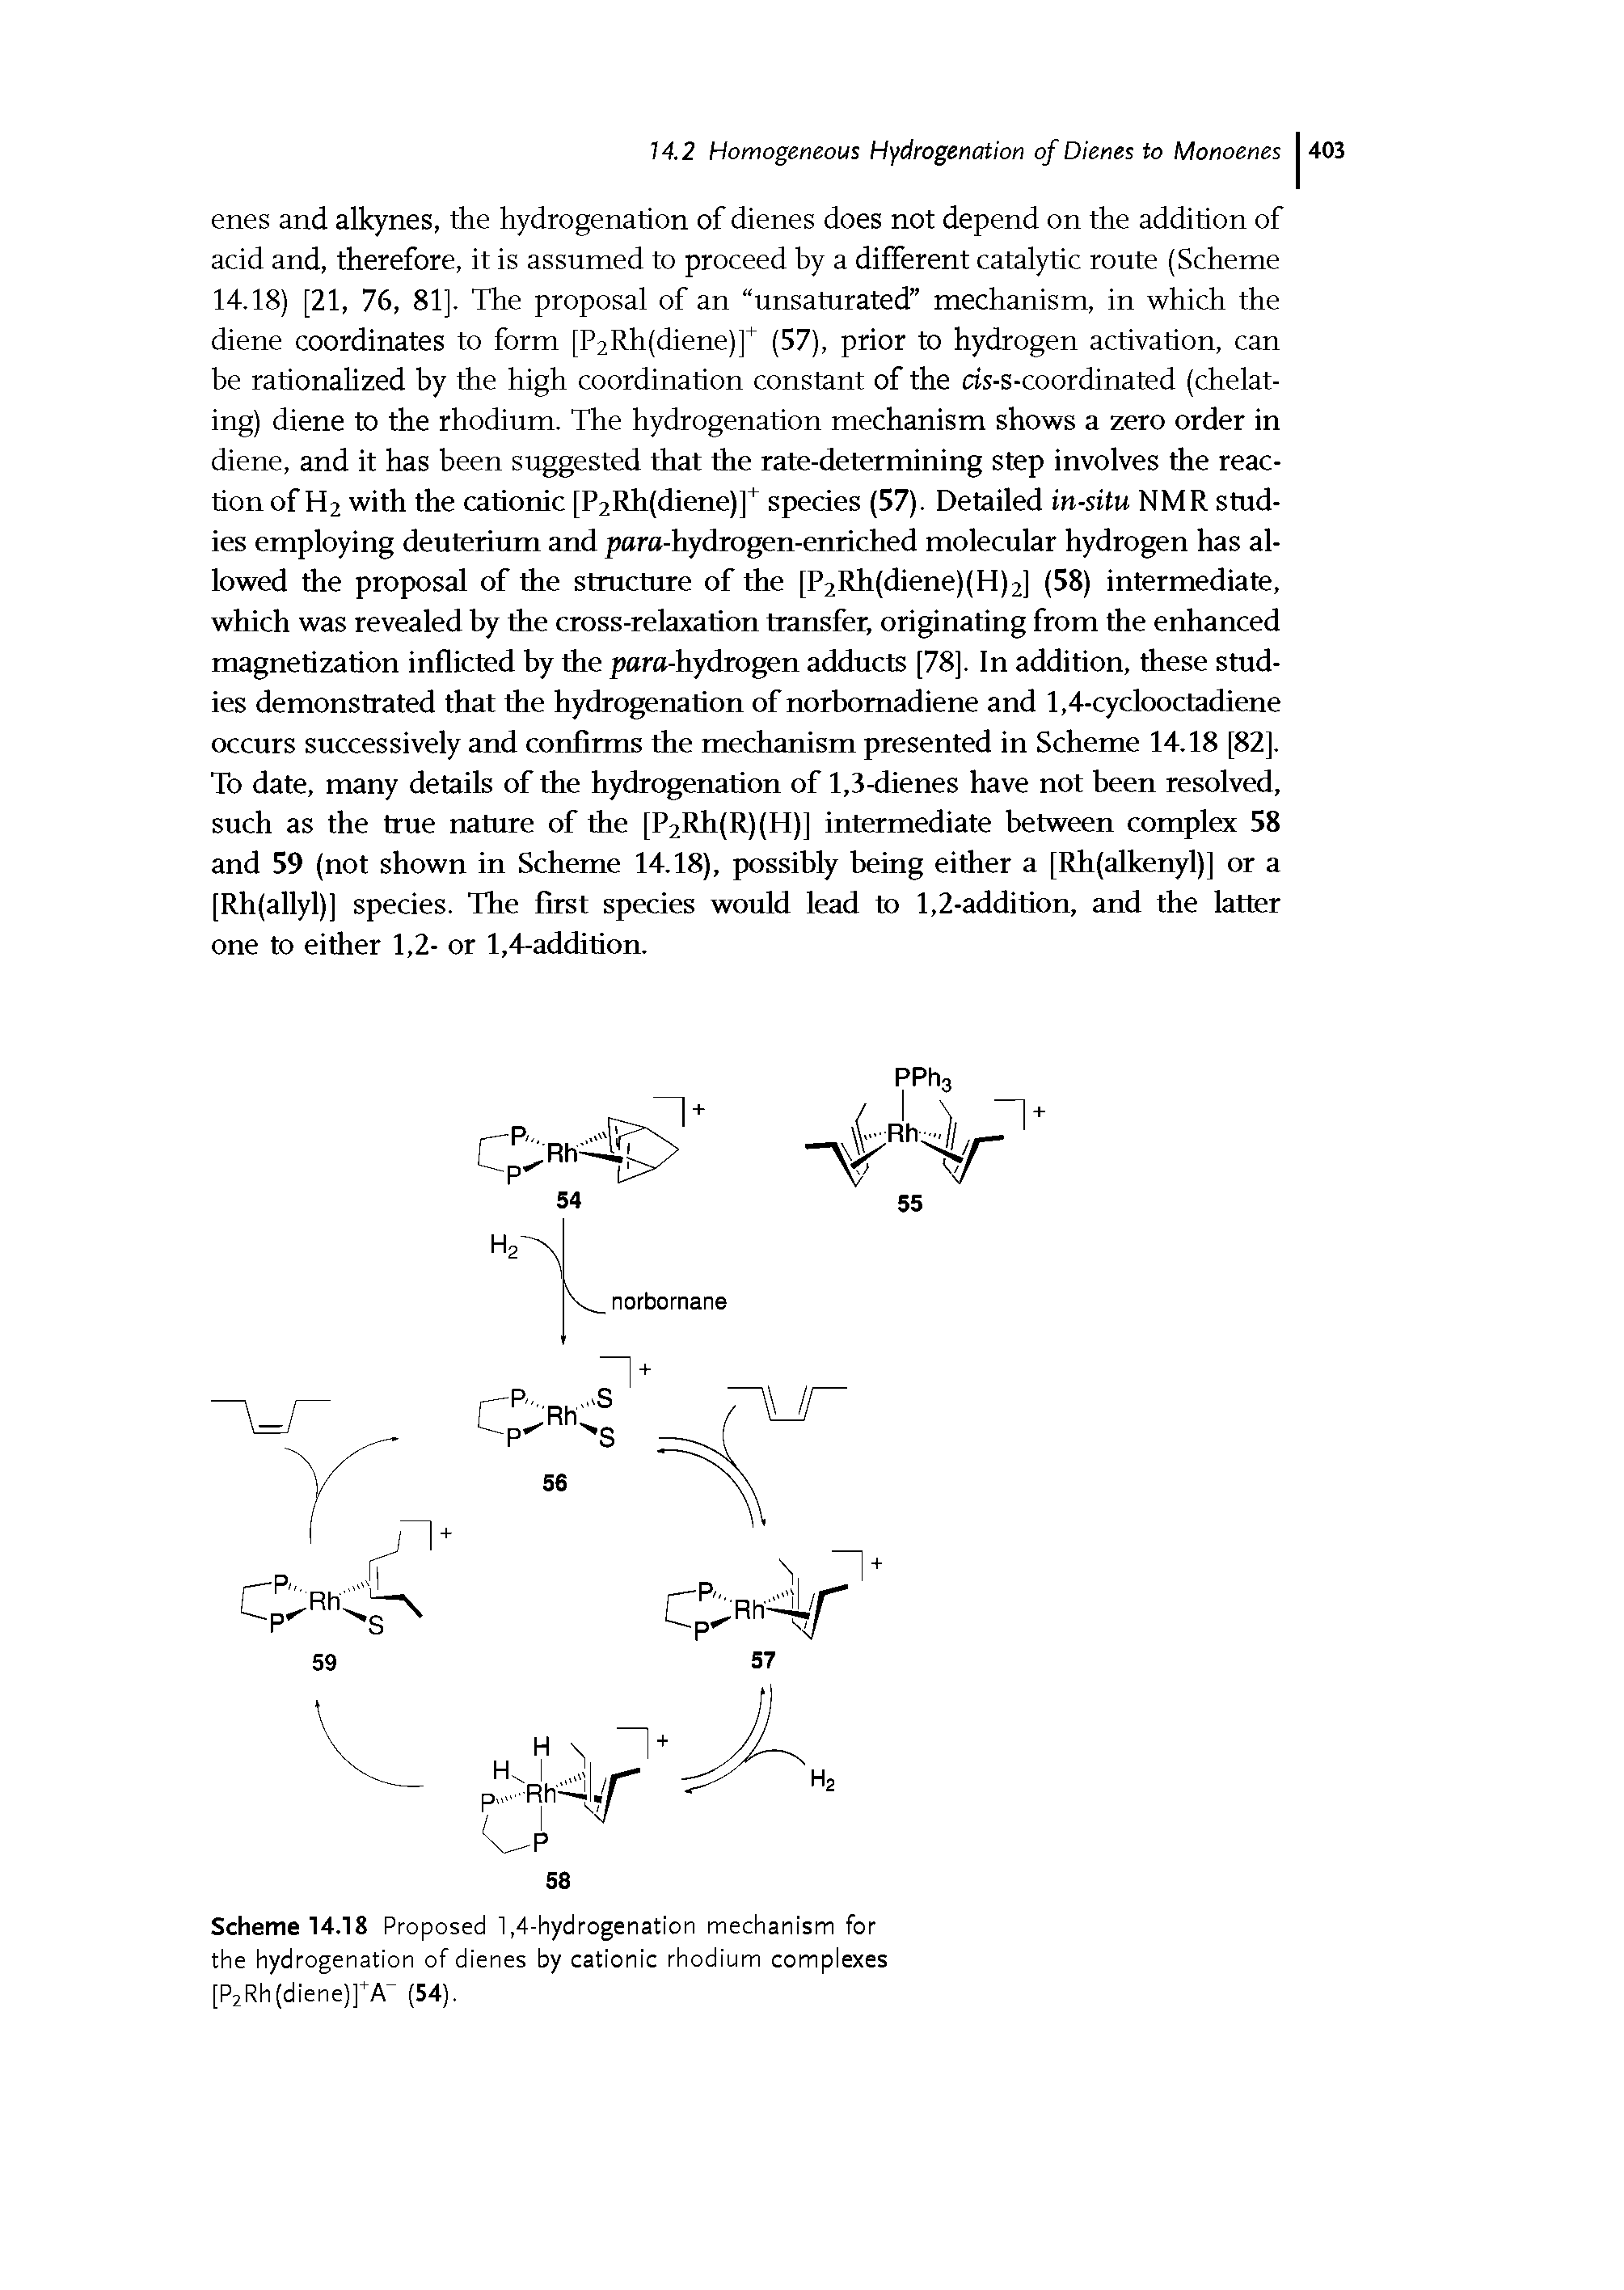 Scheme 14.18 Proposed 1,4-hydrogenation mechanism for the hydrogenation of dienes by cationic rhodium complexes [P2Rh(diene)]+A (54).